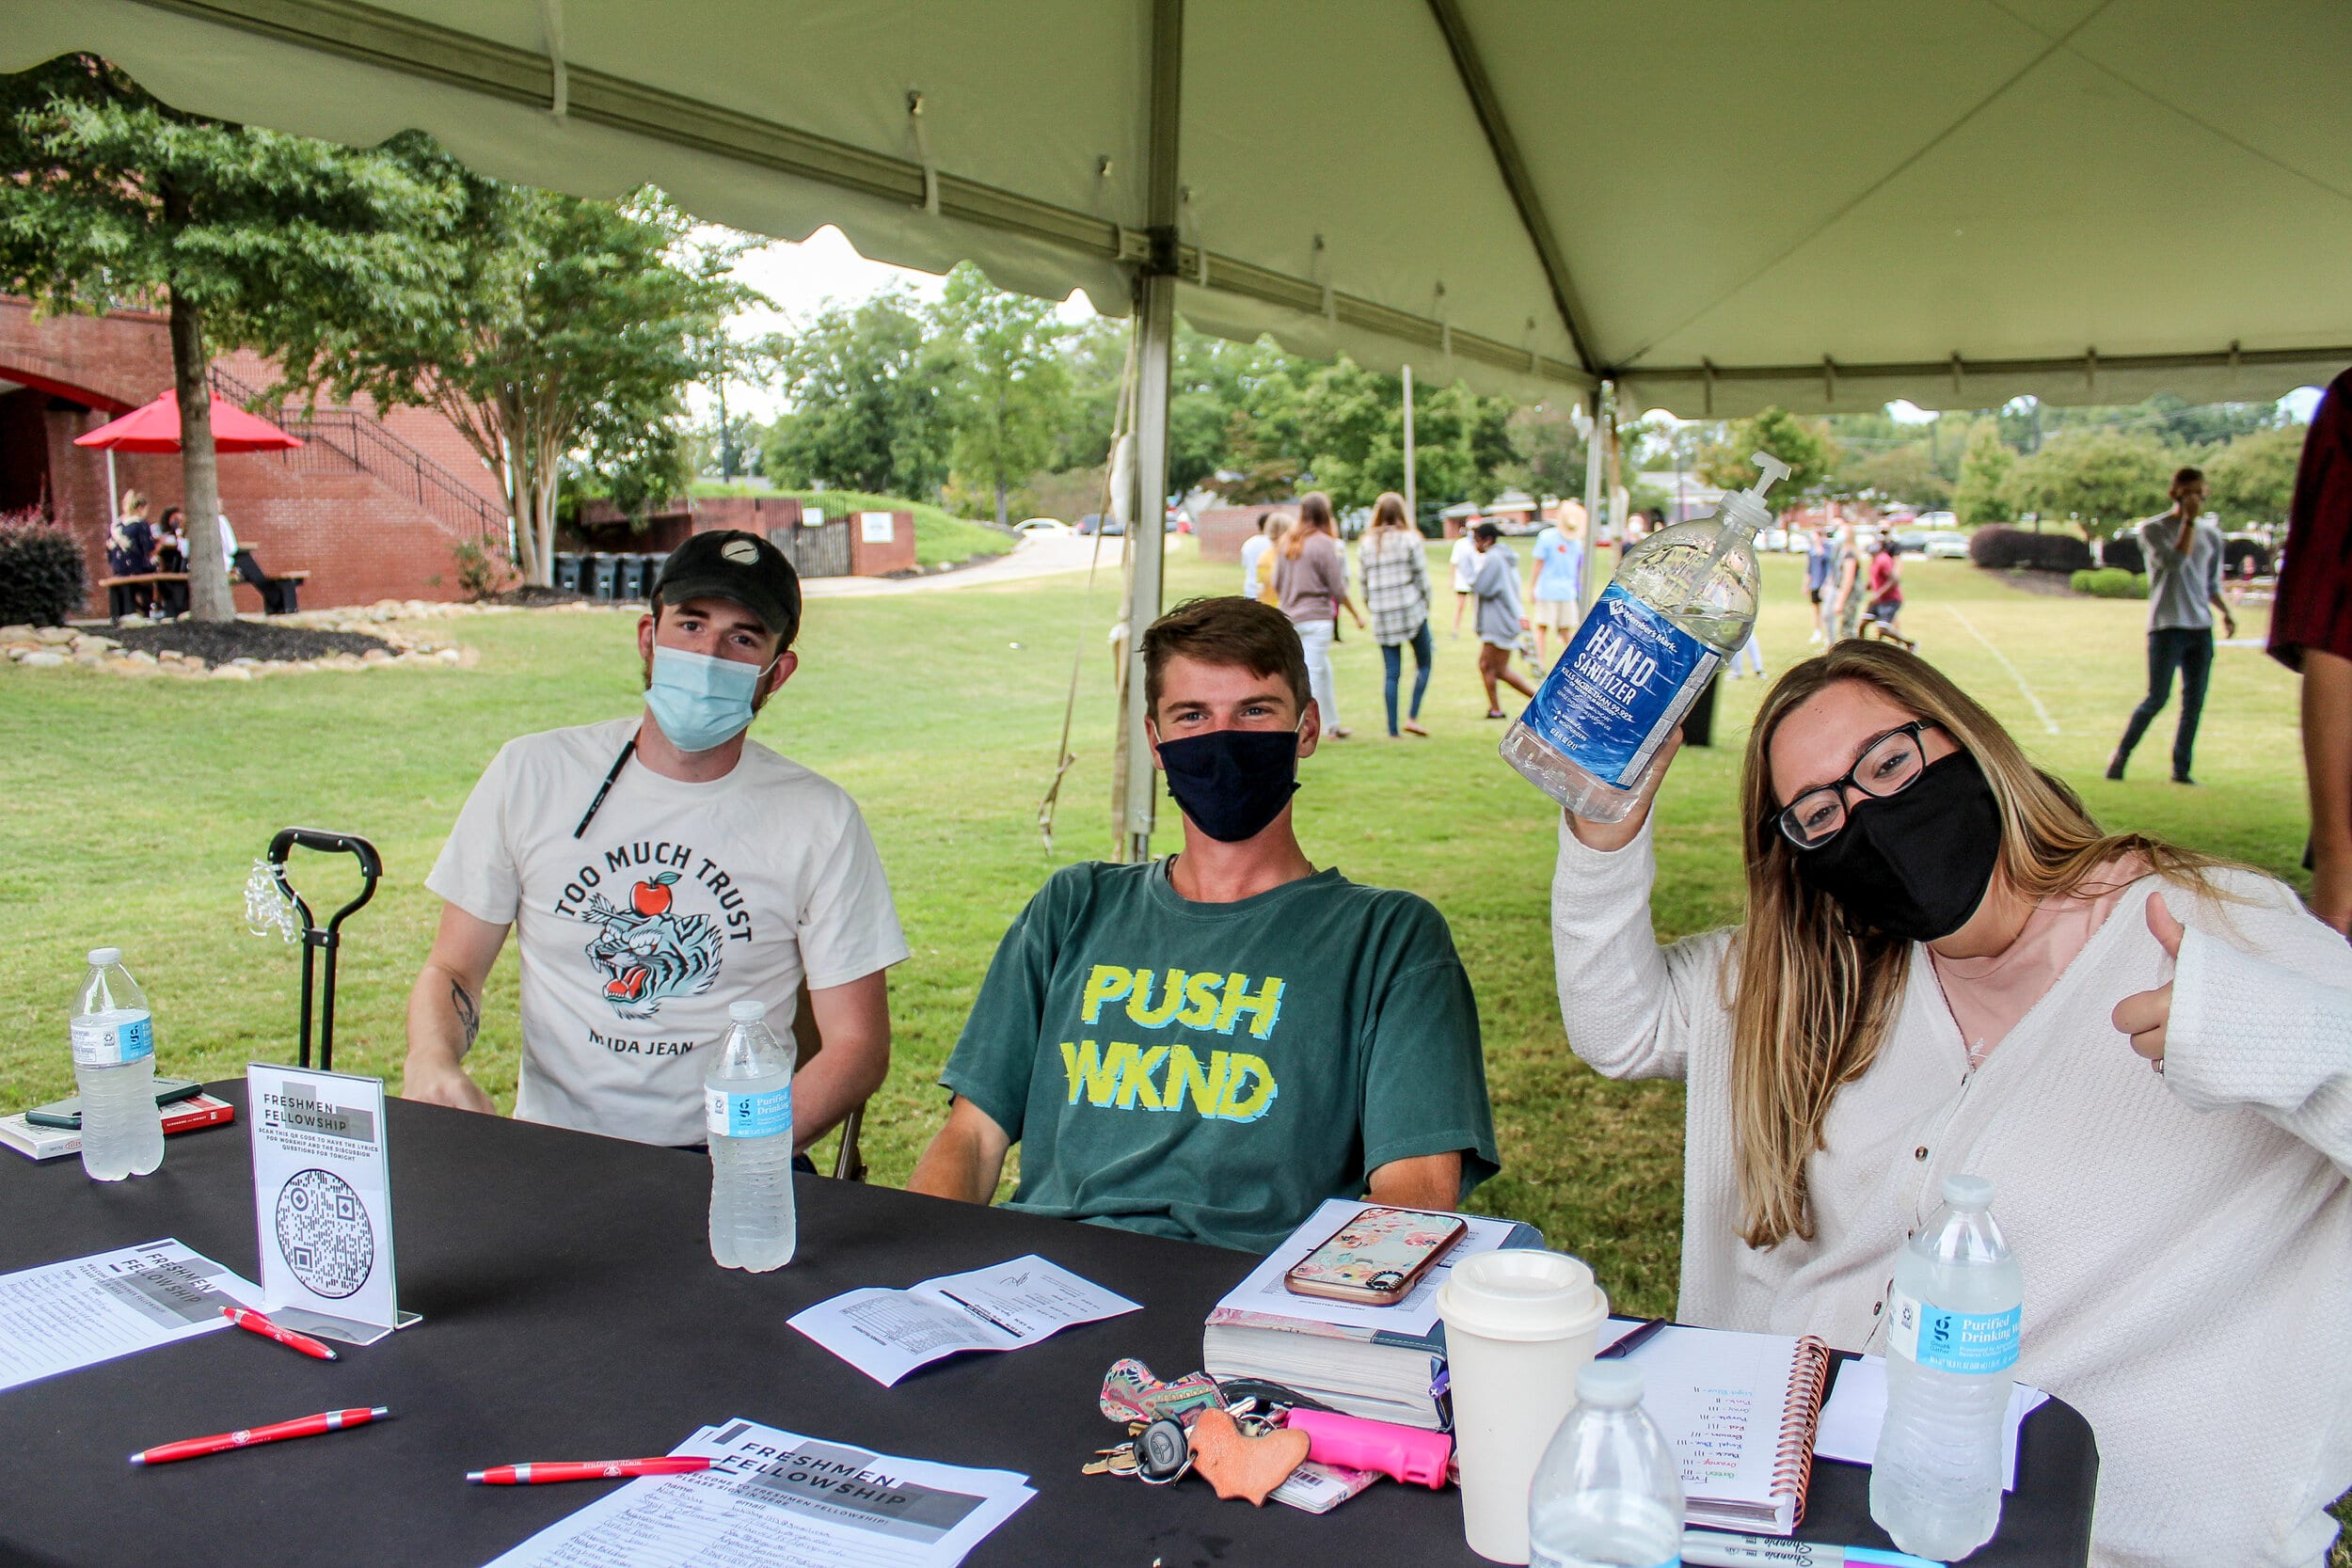 From left to right: Senior Brayden Smith, junior Drew Reynolds and senior Nicole Pollard working the sign-in table for the freshman fellowship event.